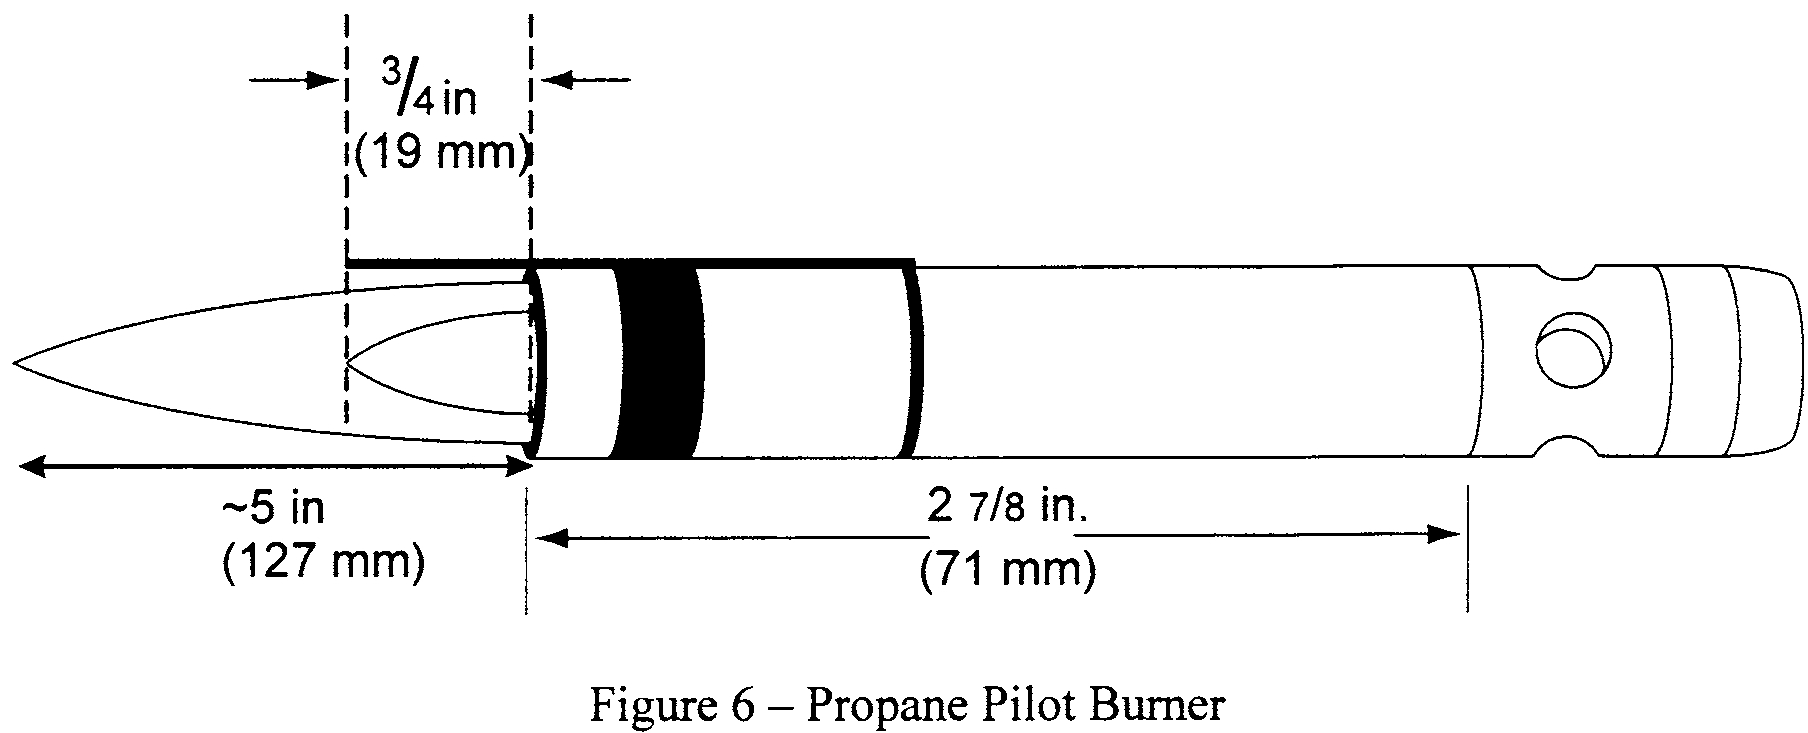 Graphic of (4) Pilot Burner. The pilot burner used to ignite the specimen must be a Bernzomatic TM commercial propane venturi torch with an axially symmetric burner tip and a propane supply tube with an orifice diameter of 0.006 inches (0.15 mm). The length of the burner tube must be 27/8 inches (71 mm). The propane flow must be adjusted via gas pressure through an in-line regulator to produce a blue inner cone length of 3/4 inch (19 mm). A 3/4 inch (19 mm) guide (such as a thin strip of metal) may be soldered to the top of the burner to aid in setting the flame height. The overall flame length must be approximately 5 inches long (127 mm). Provide a way to move the burner out of the ignition position so that the flame is horizontal and at least 2 inches (50 mm) above the specimen plane. See figure 6.